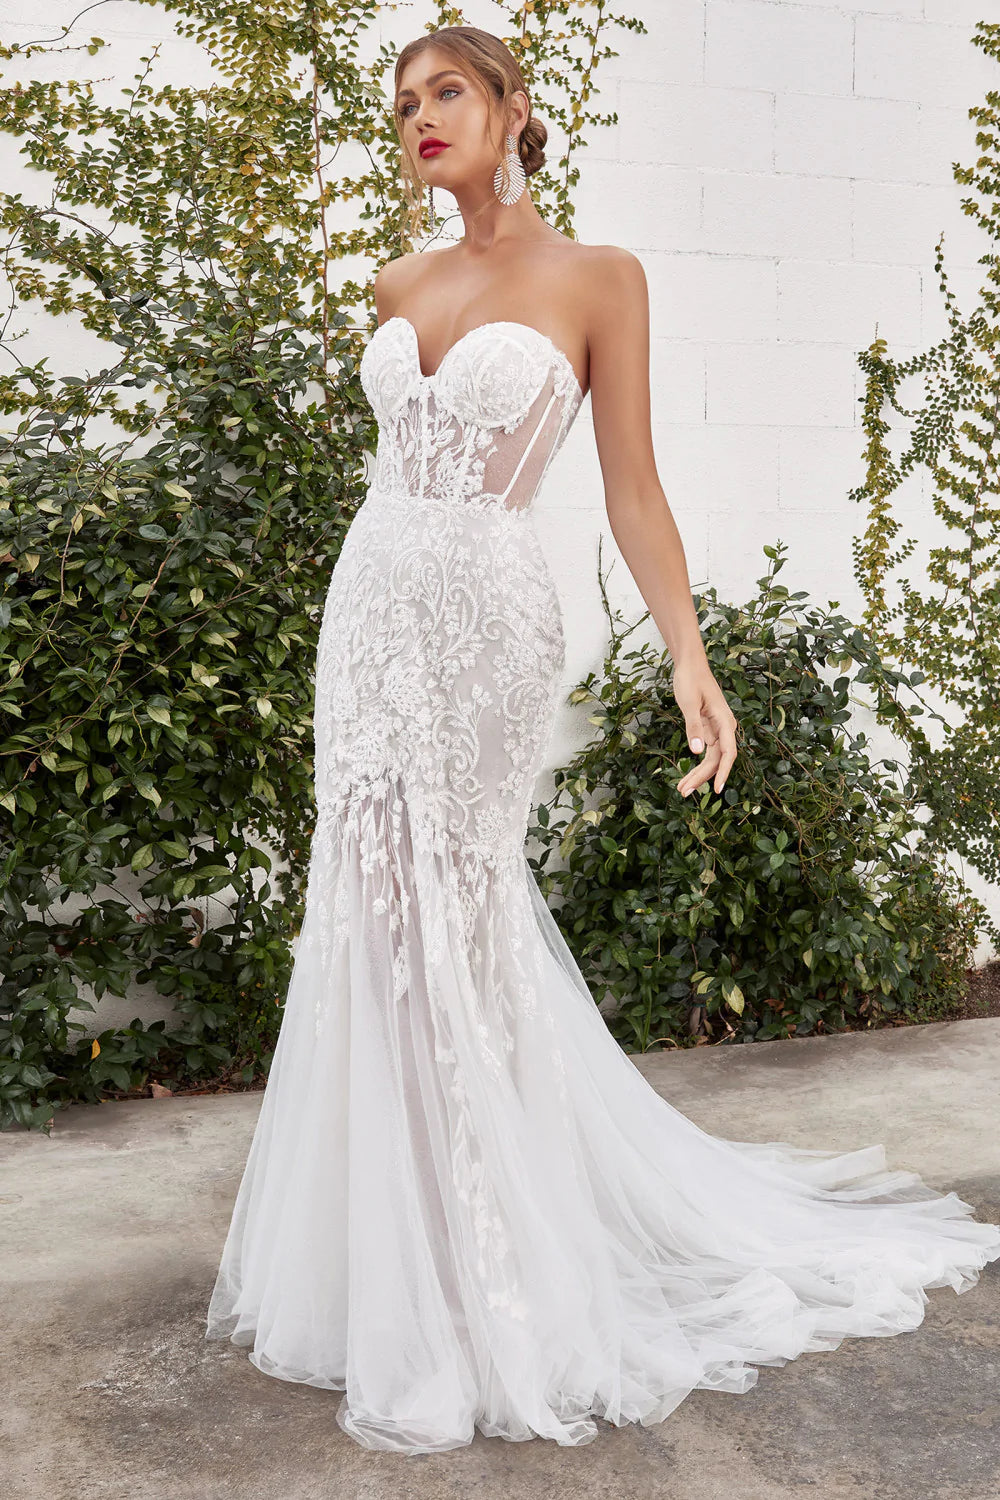 Sereia Sparkly Mermaid Detachable Off Shoulder Feather Wedding Dress: White - Bella and Bloom Boutique